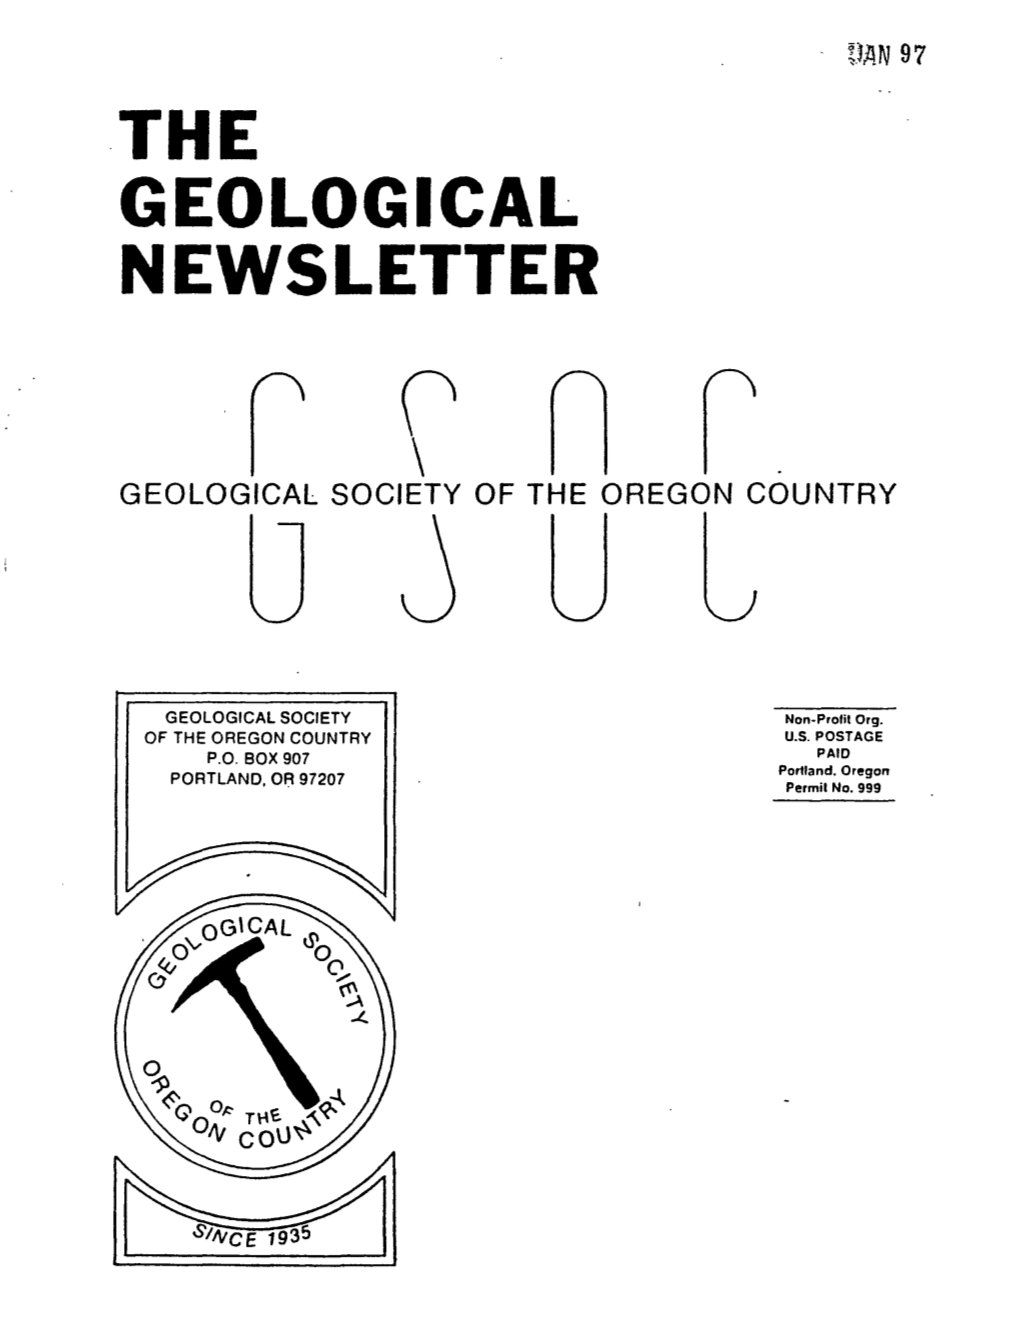 The Geological Newsletter \ Geological Society of the Oregon Country